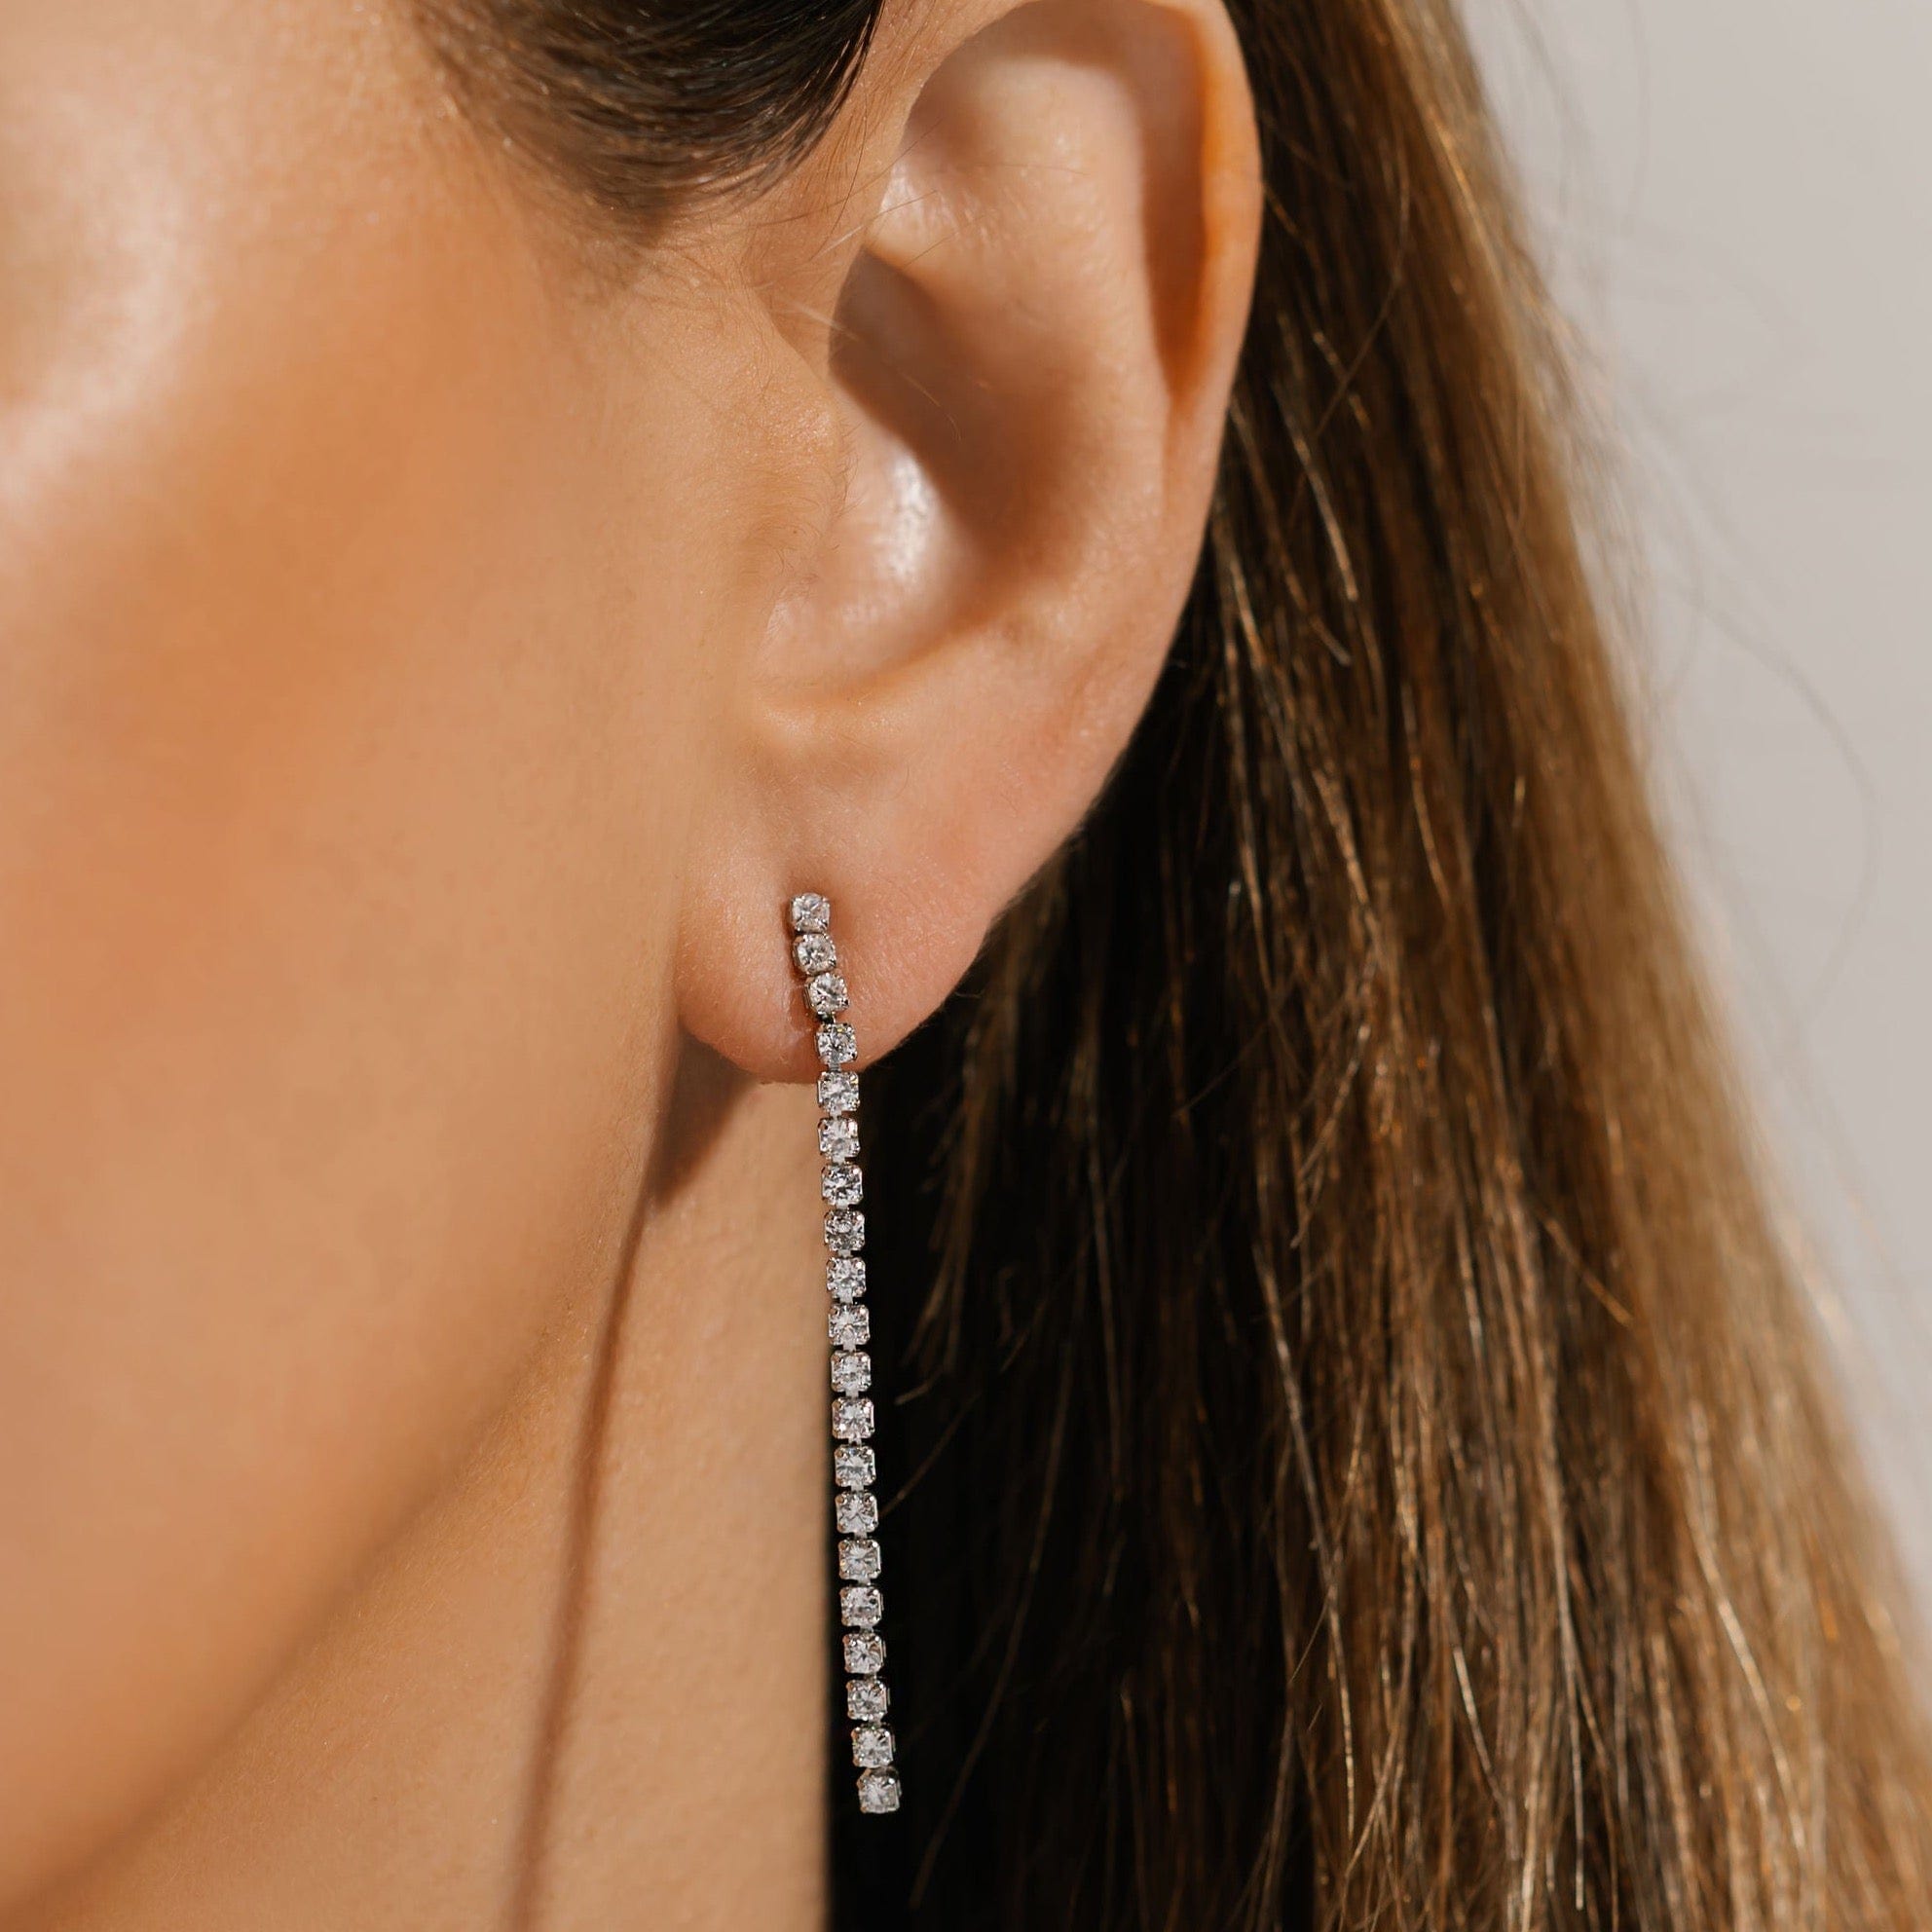 The crystal accents on the sterling silver Scintilla Dangle Hoop sparkle brightly as they fall from the model's ear.